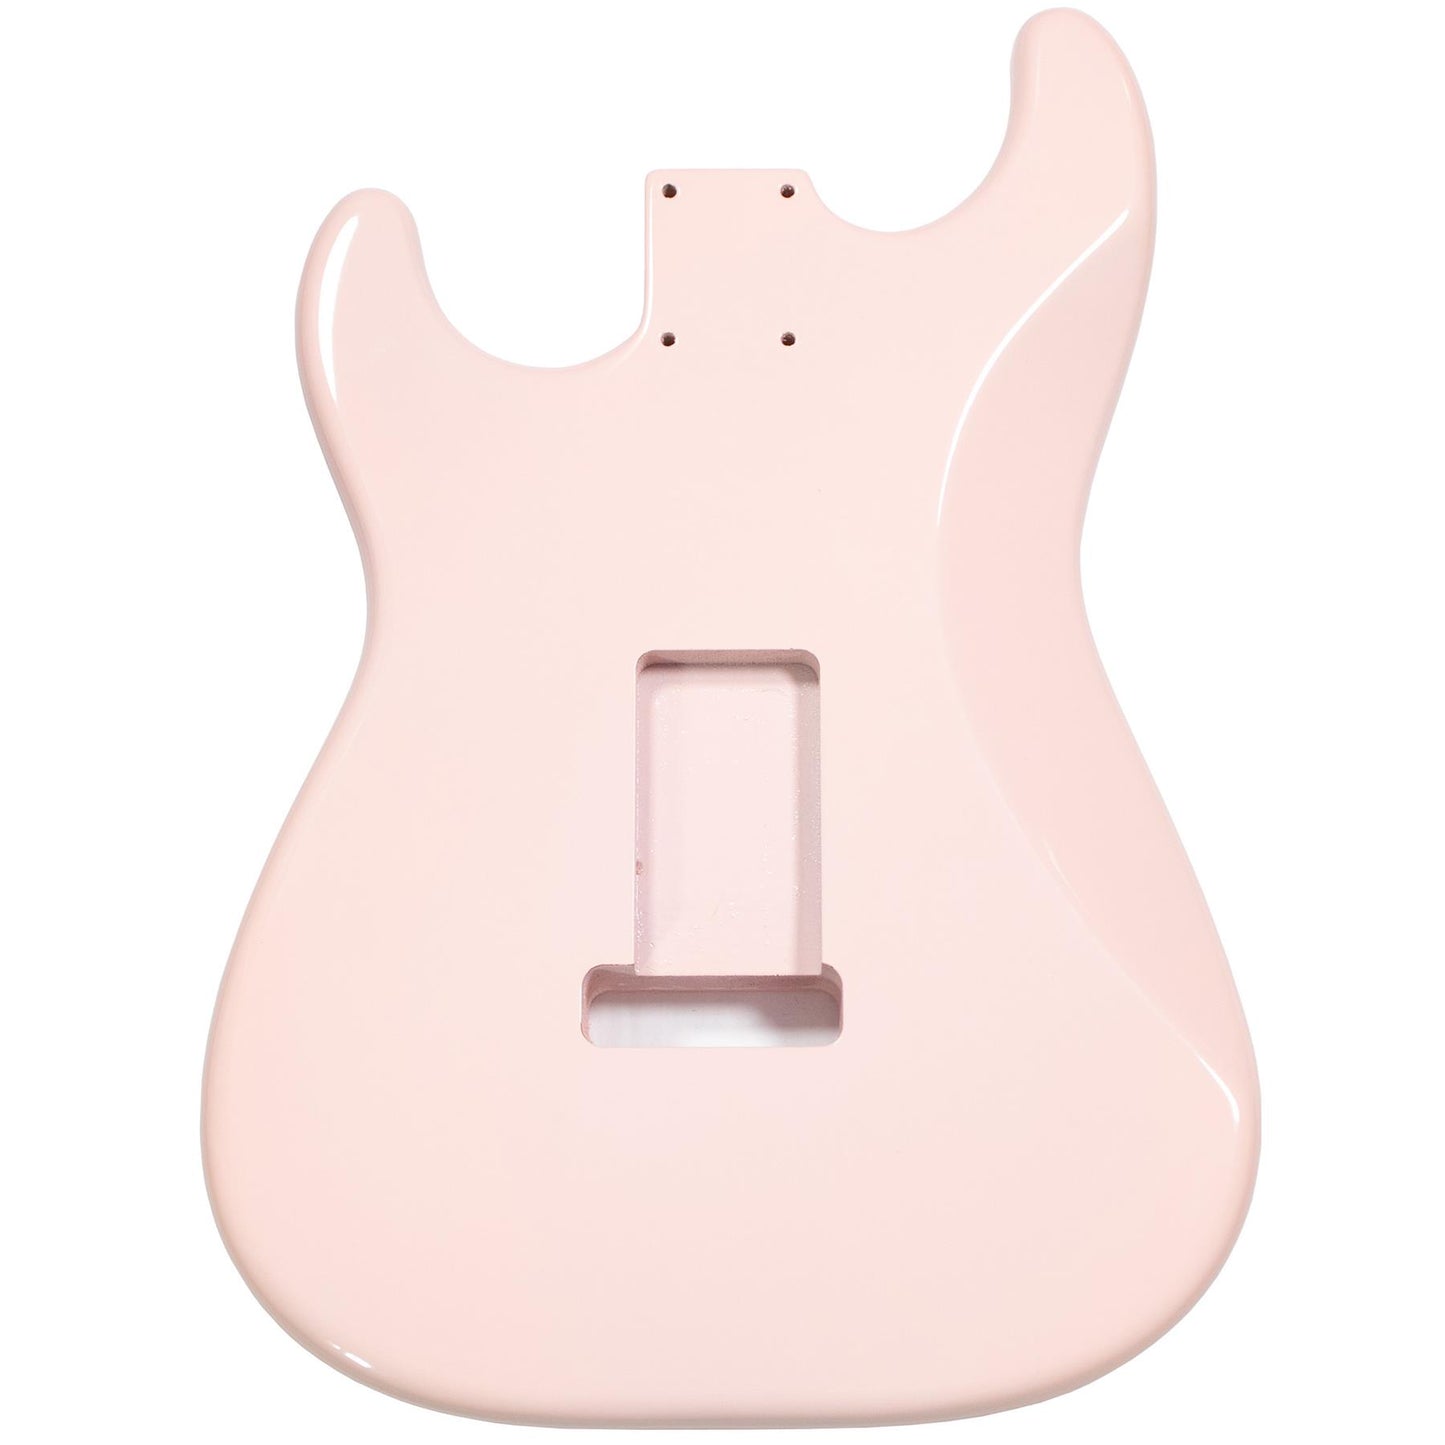 Stratocaster Compatible Body HSS - Shell Pink